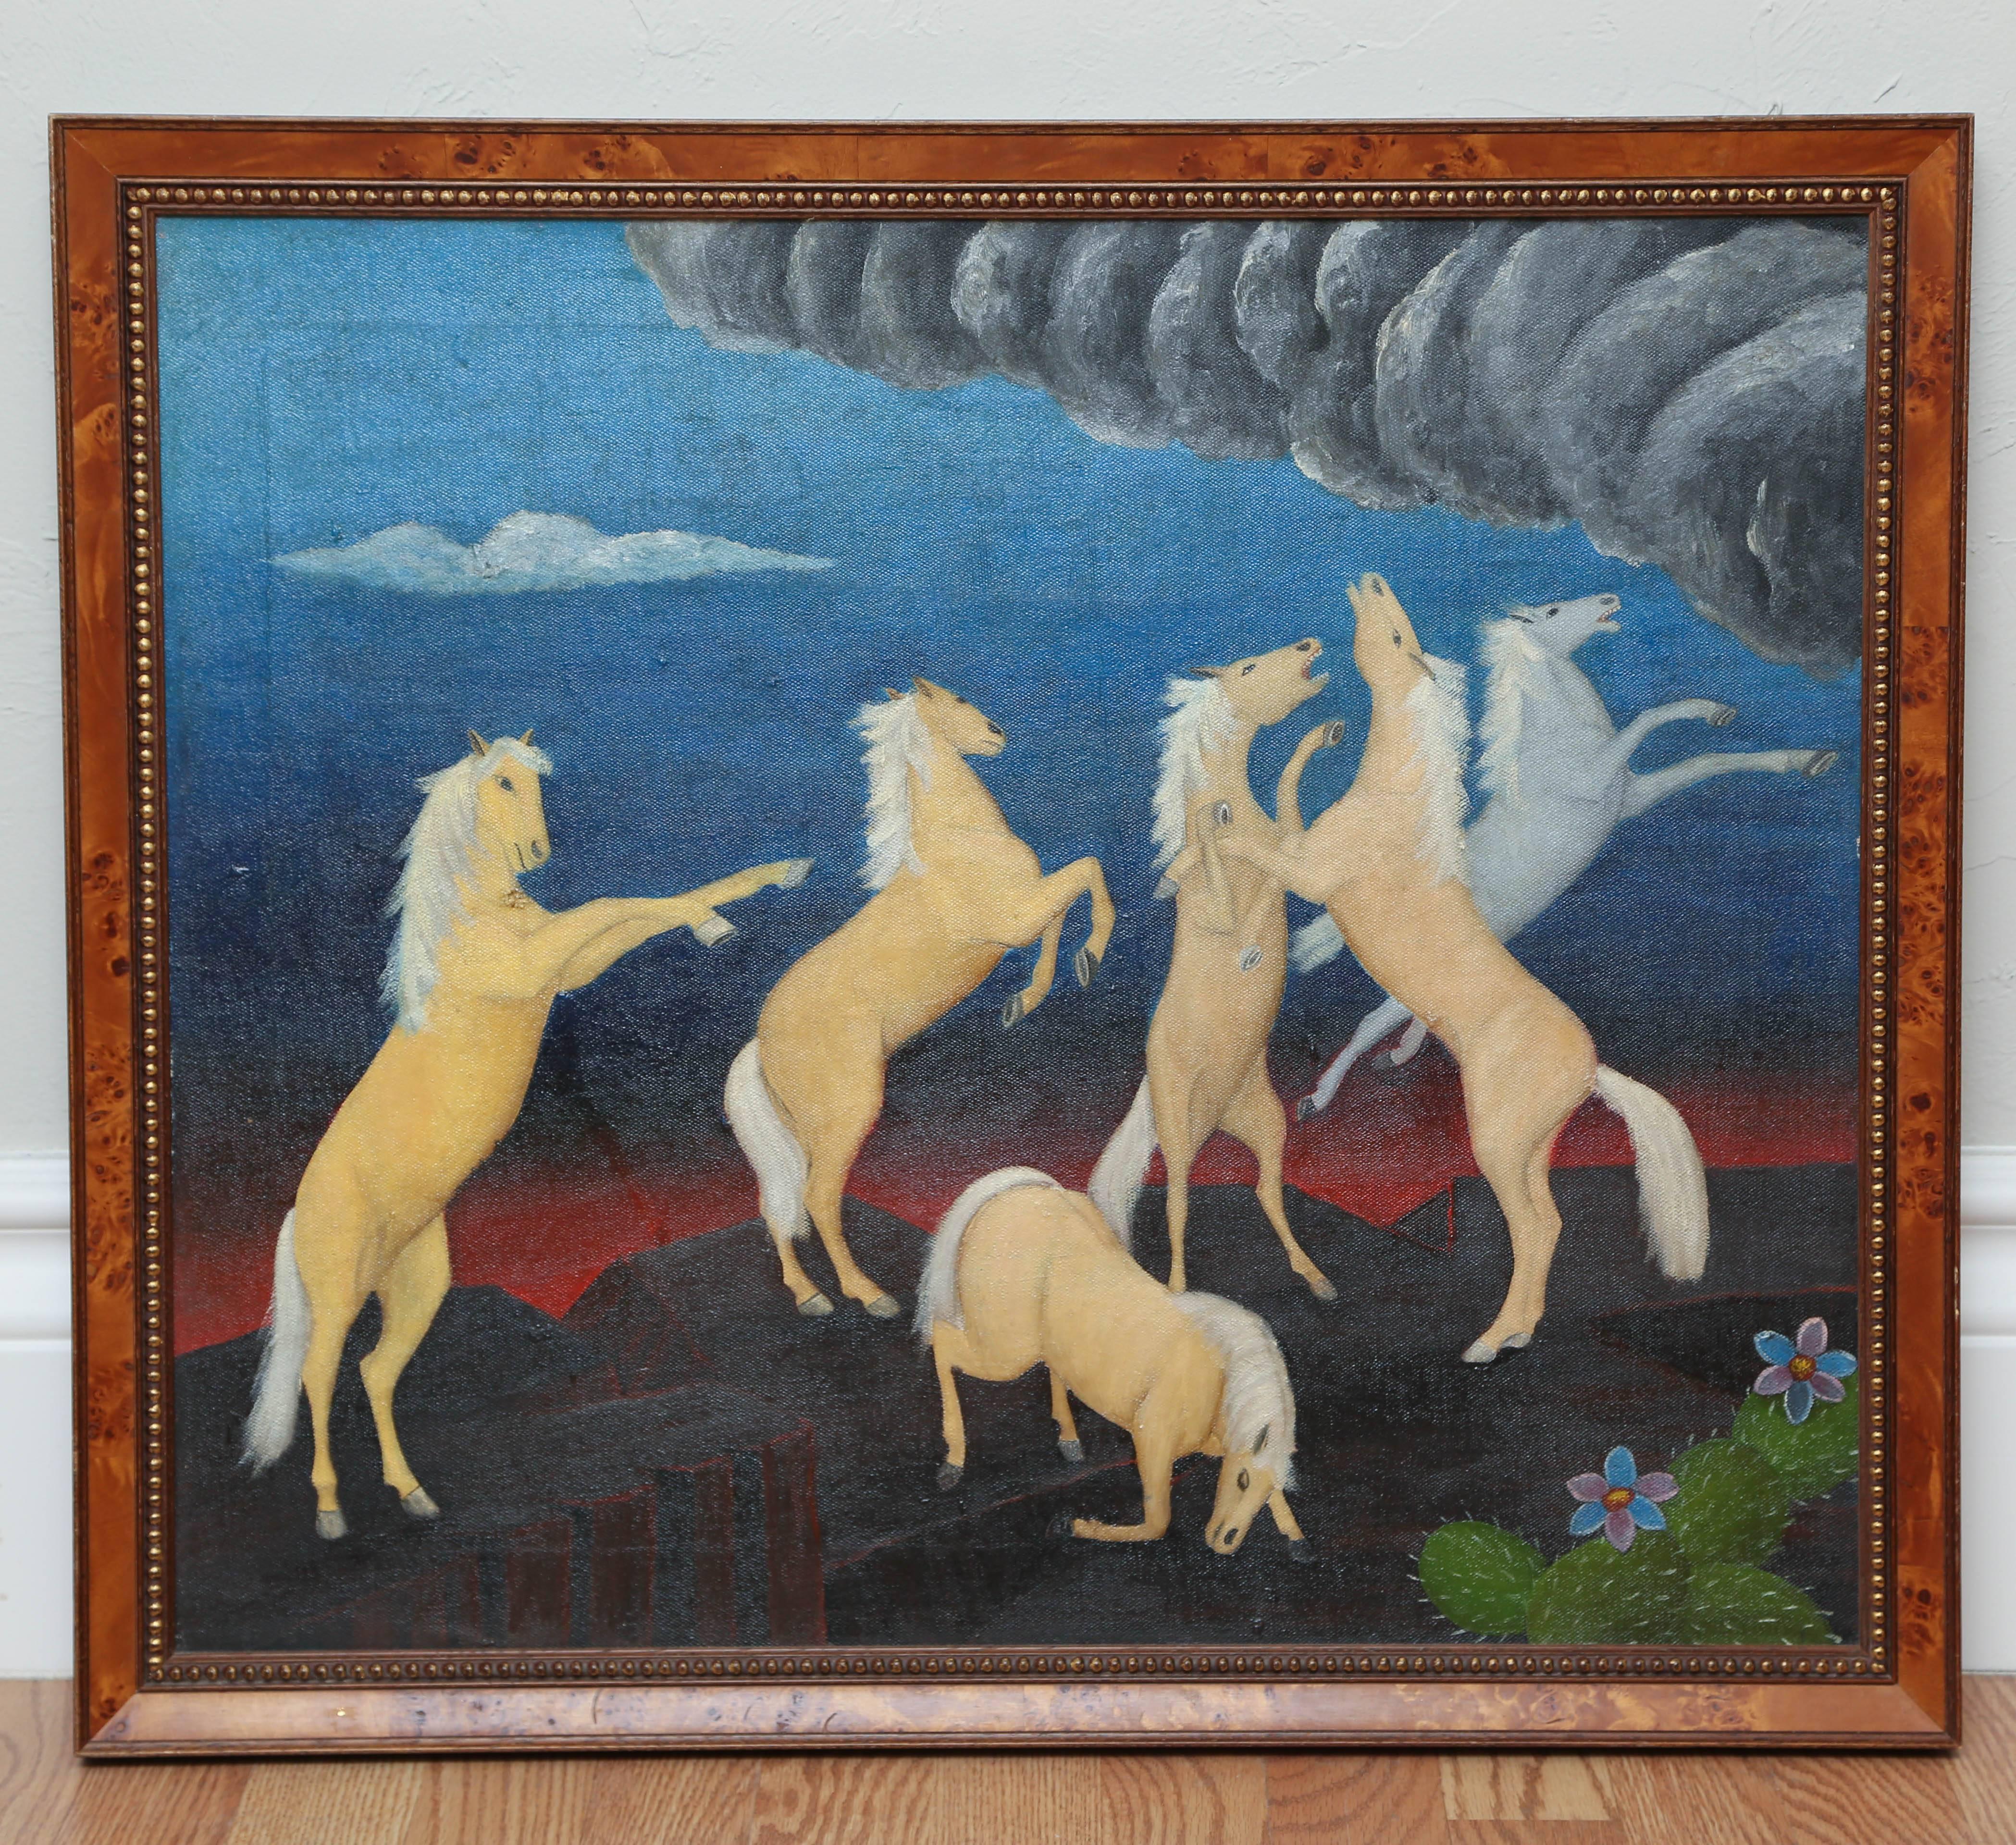 Oil painting of six Palominos reacting to stormy weather.
Canvas size 22